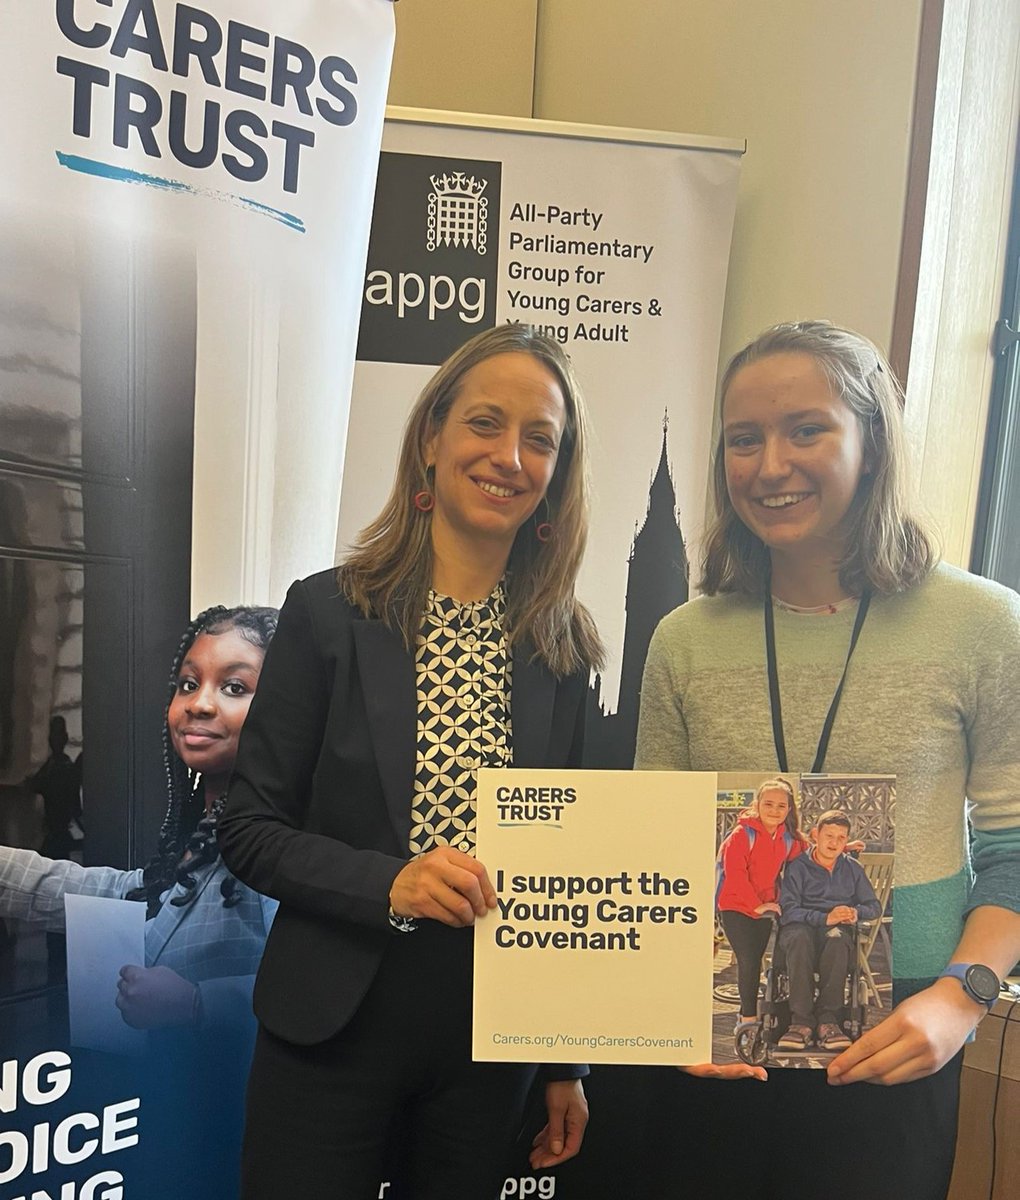 A real pleasure to meet some incredible young carers yesterday to mark #YoungCarersActionDay. Young carers face immense responsibilities, and their courage and determination never cease to inspire. We're working across government to get them the support they need.